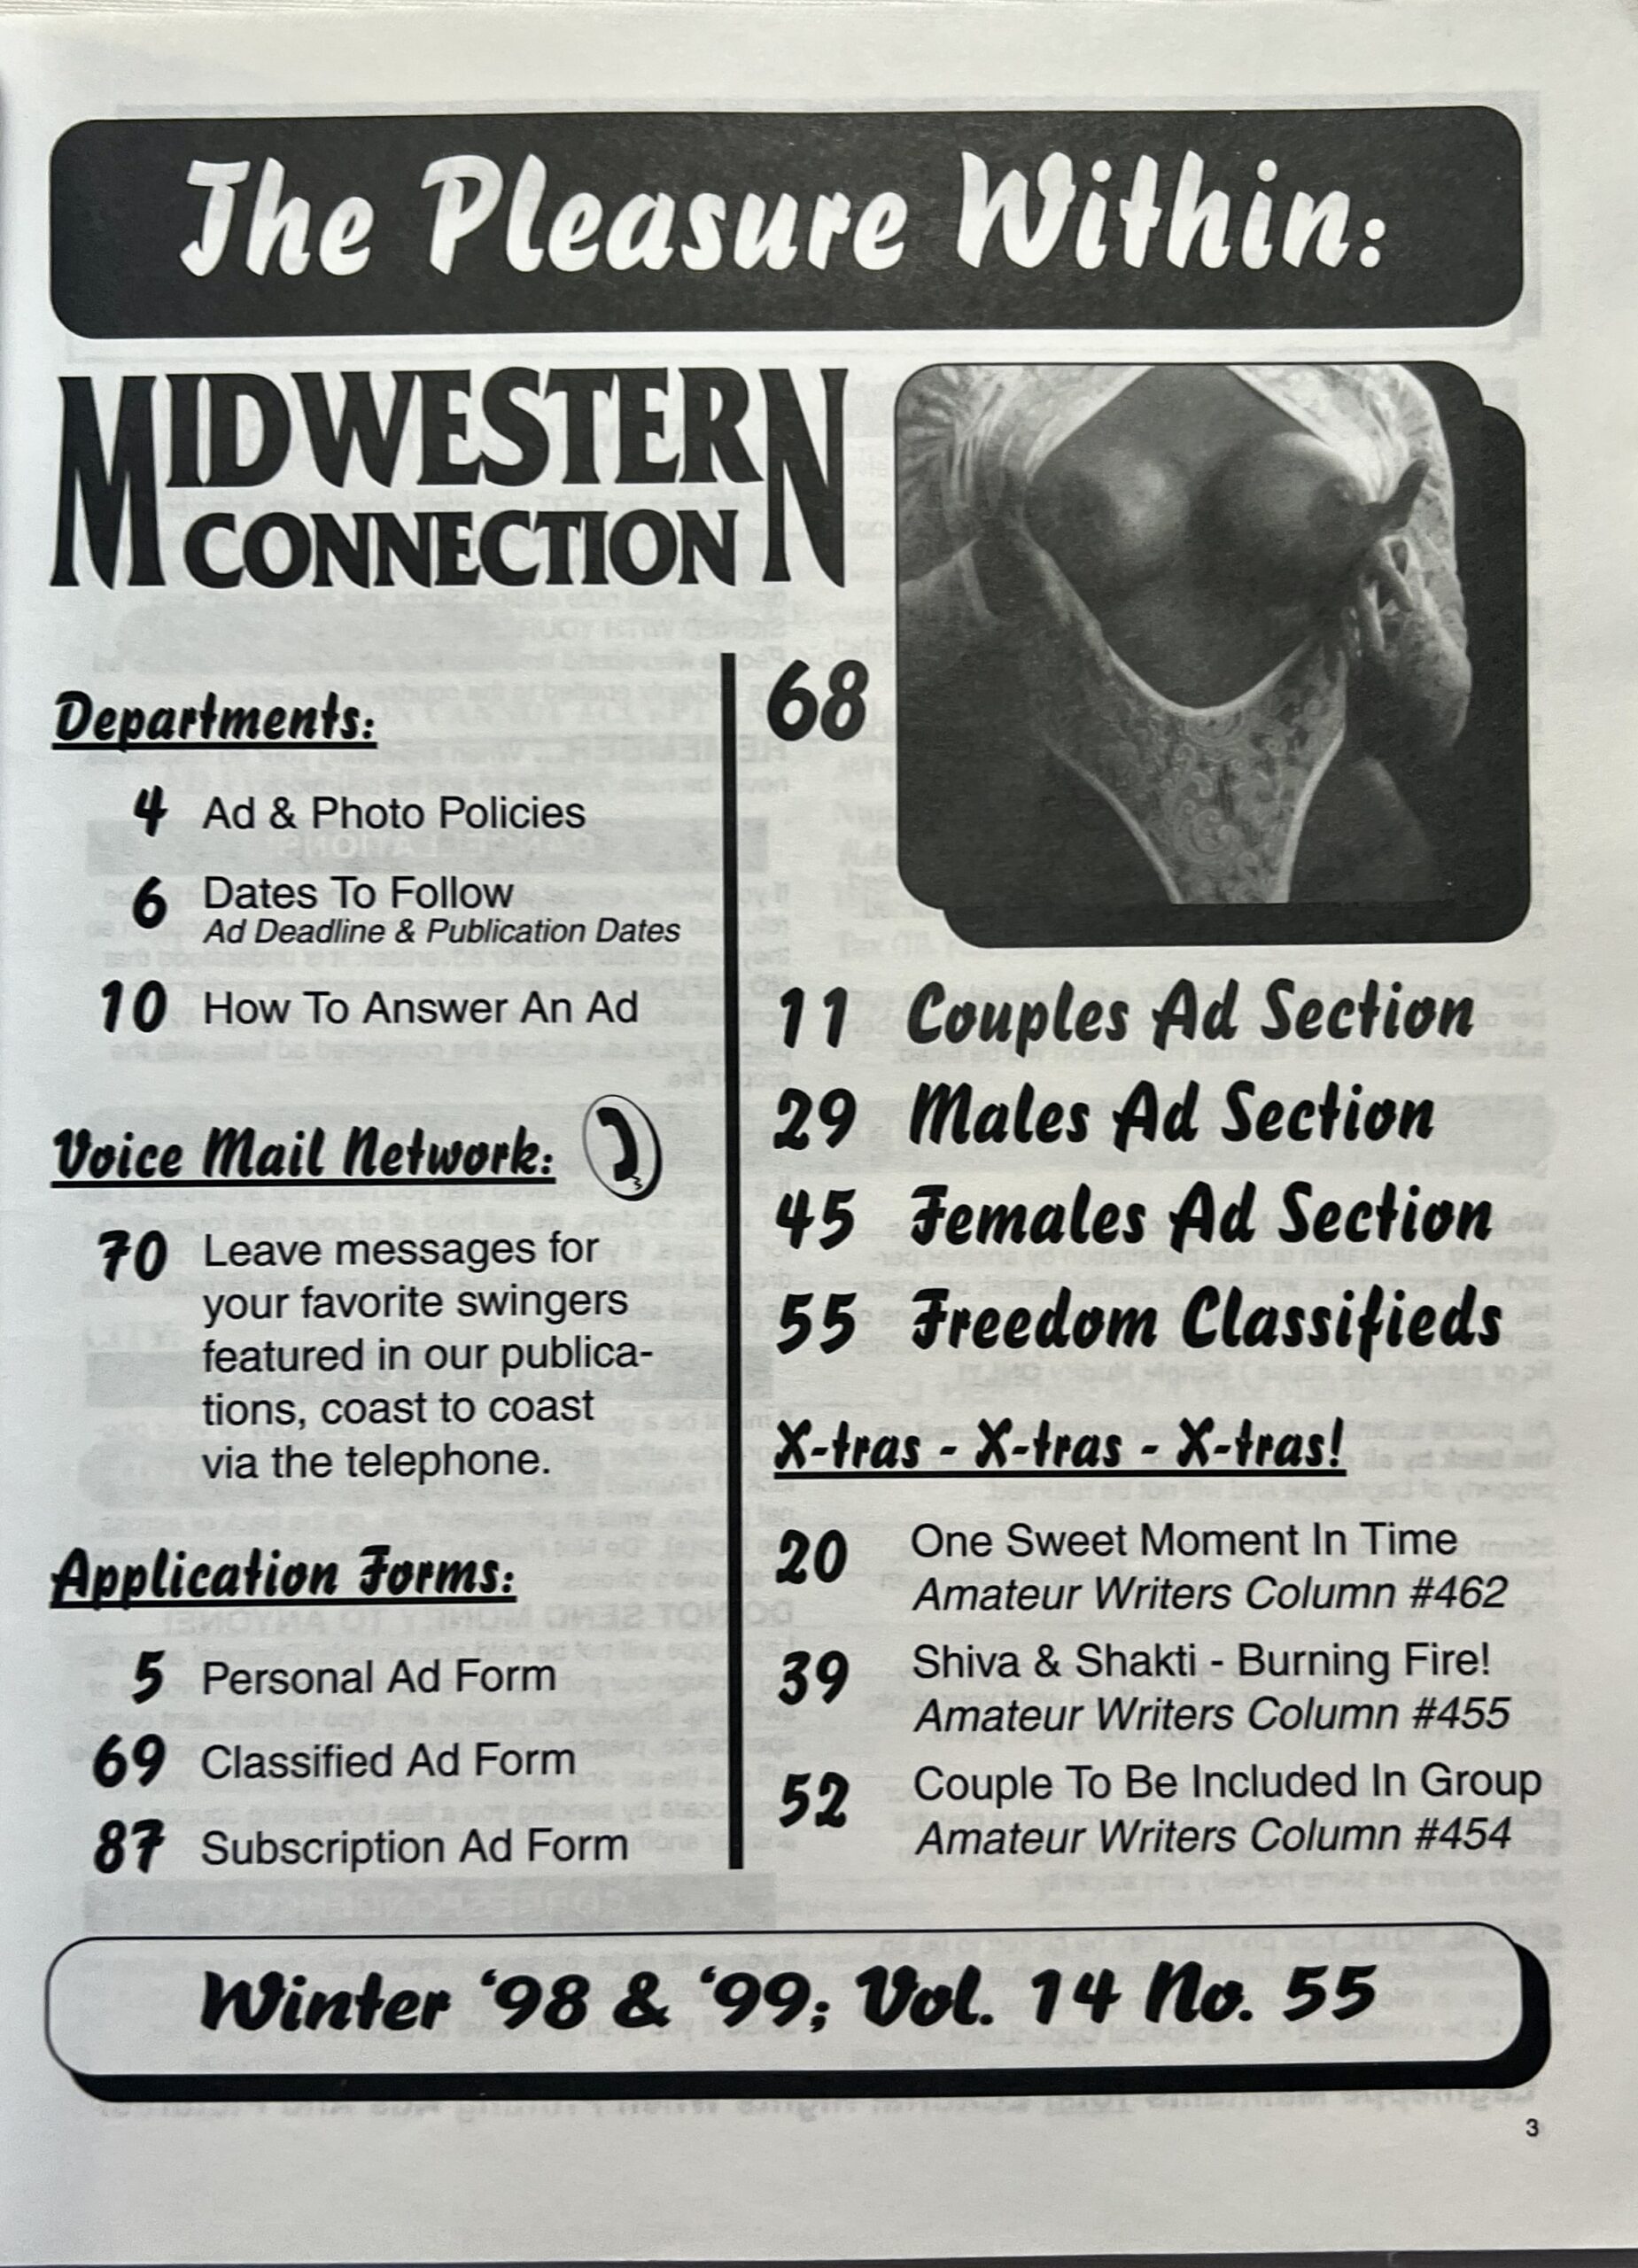 Mid Western Connection 17/66 December 1998 Swingers and Personals Magazine -Heart Attack- Vintage Magazines 16 pic image